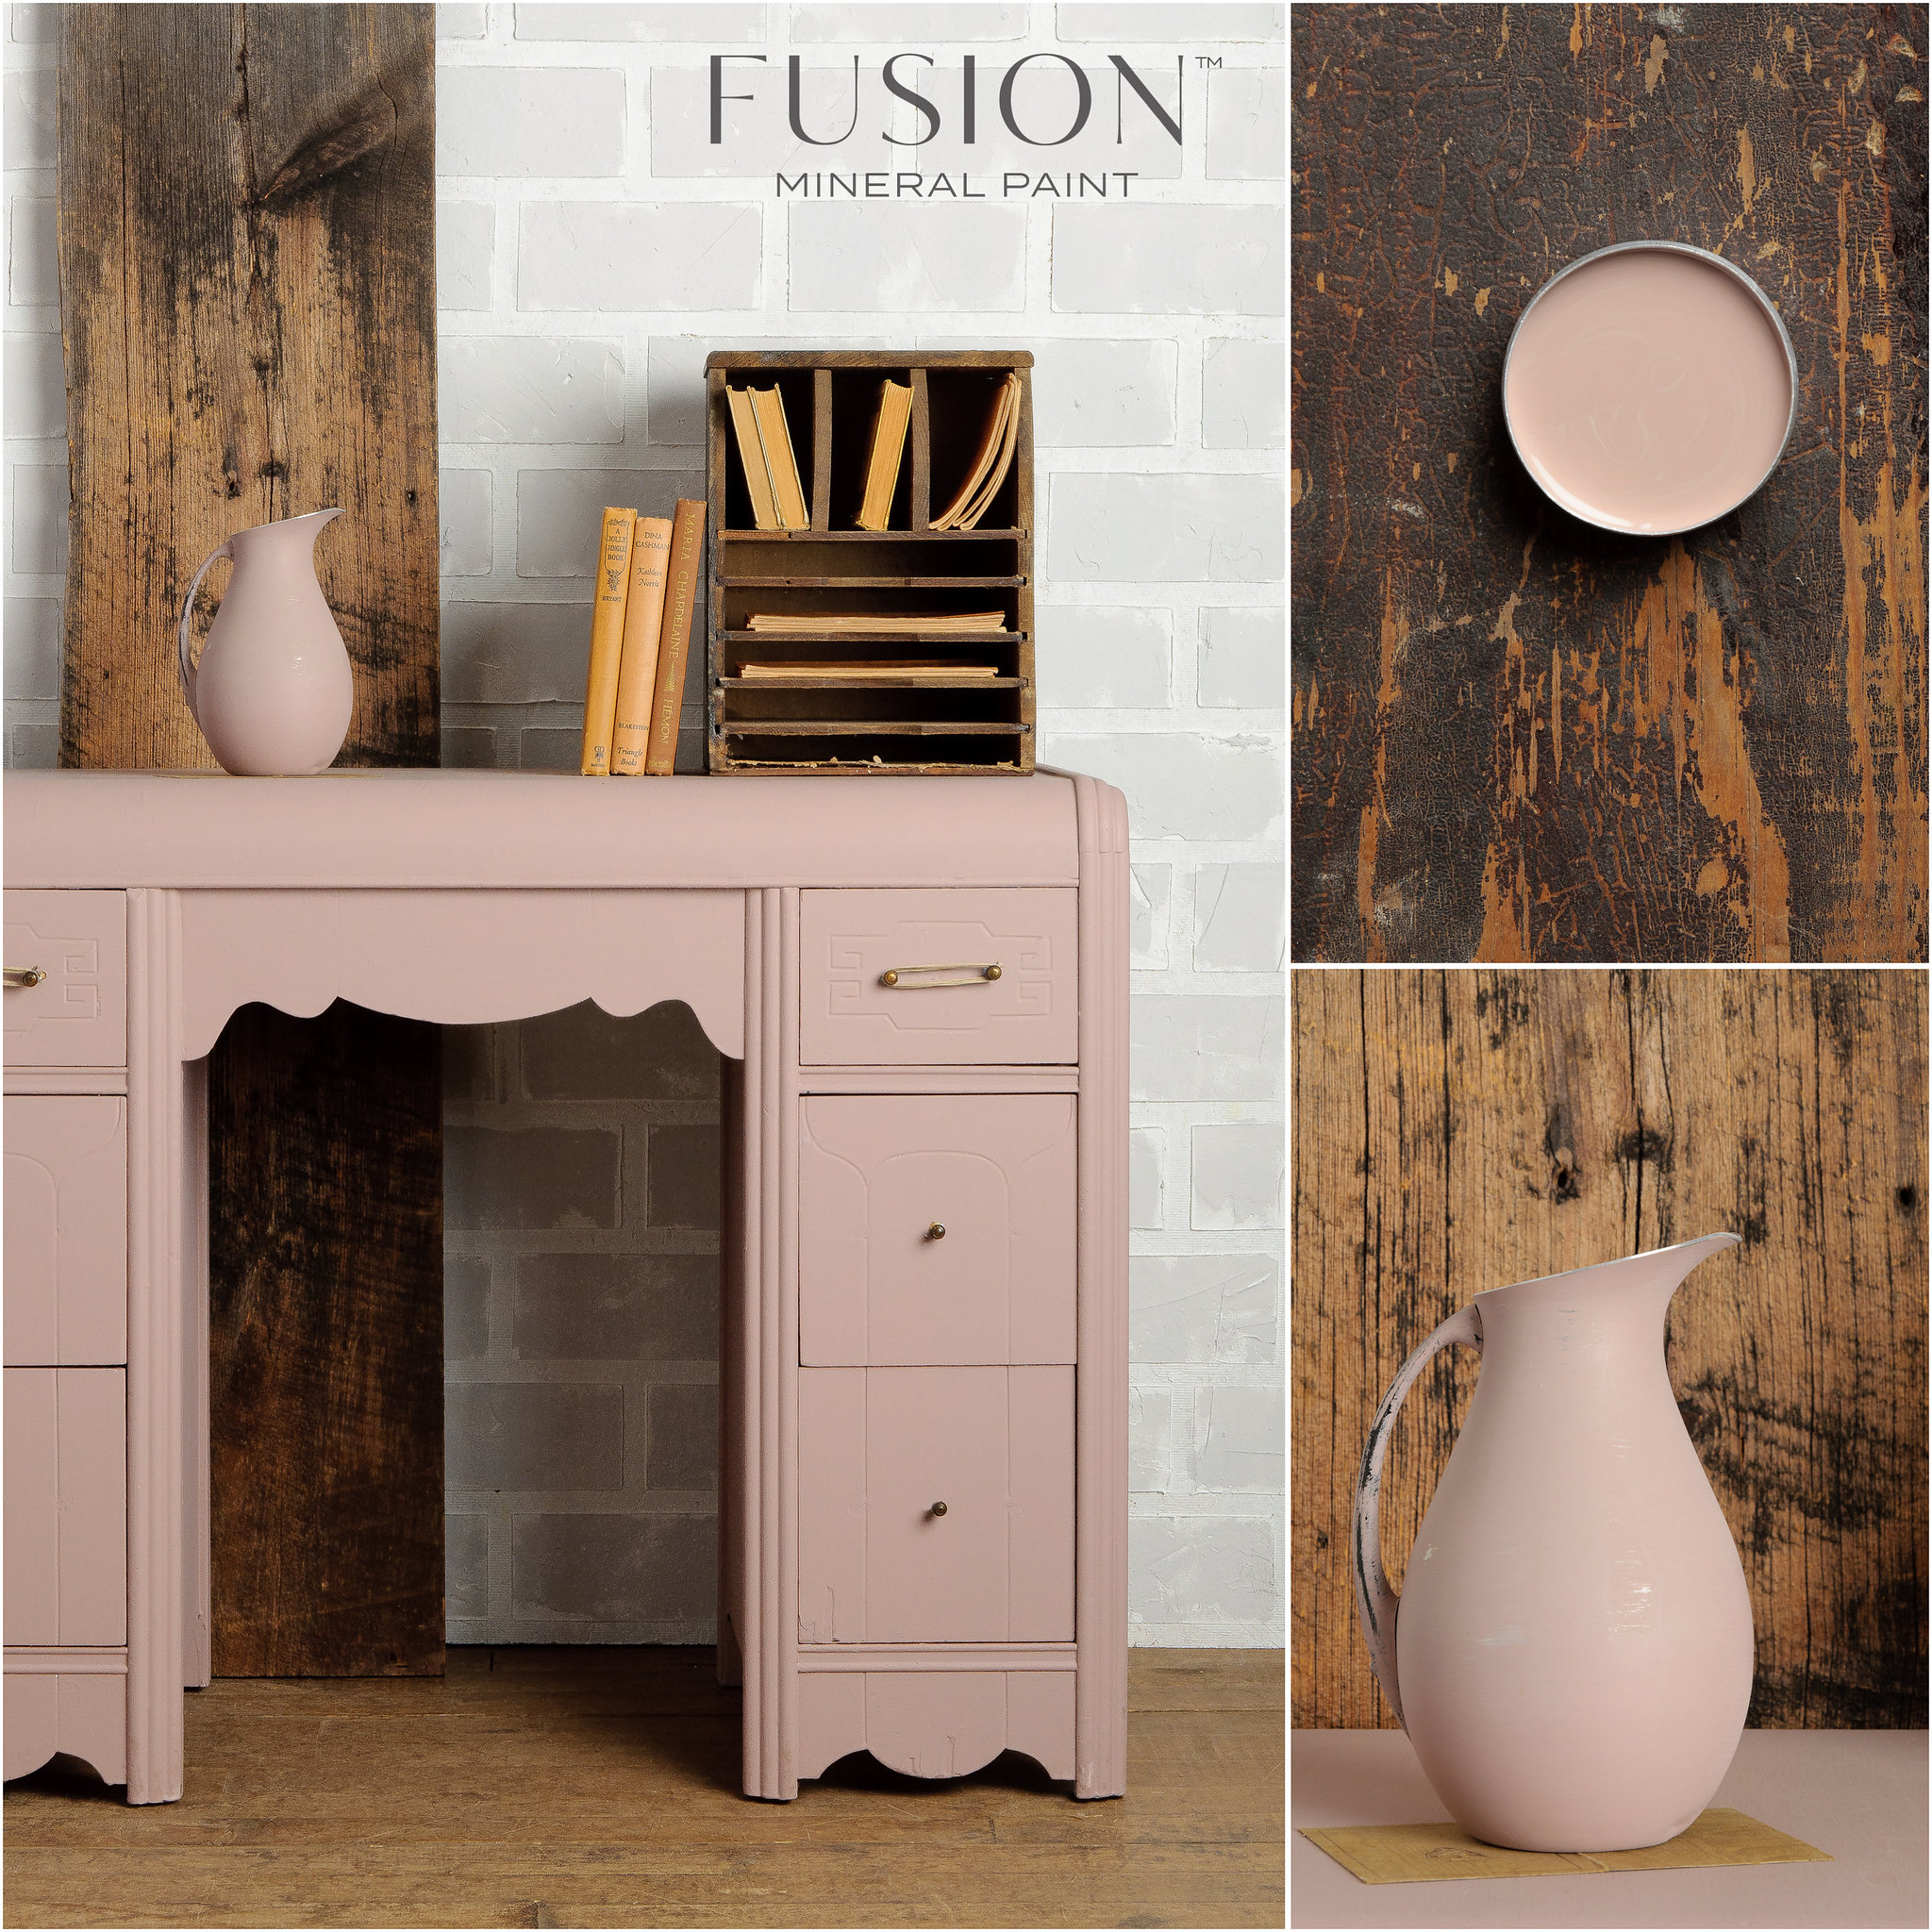 Damask Fusion Mineral Paint Goed Gestyled Brielle